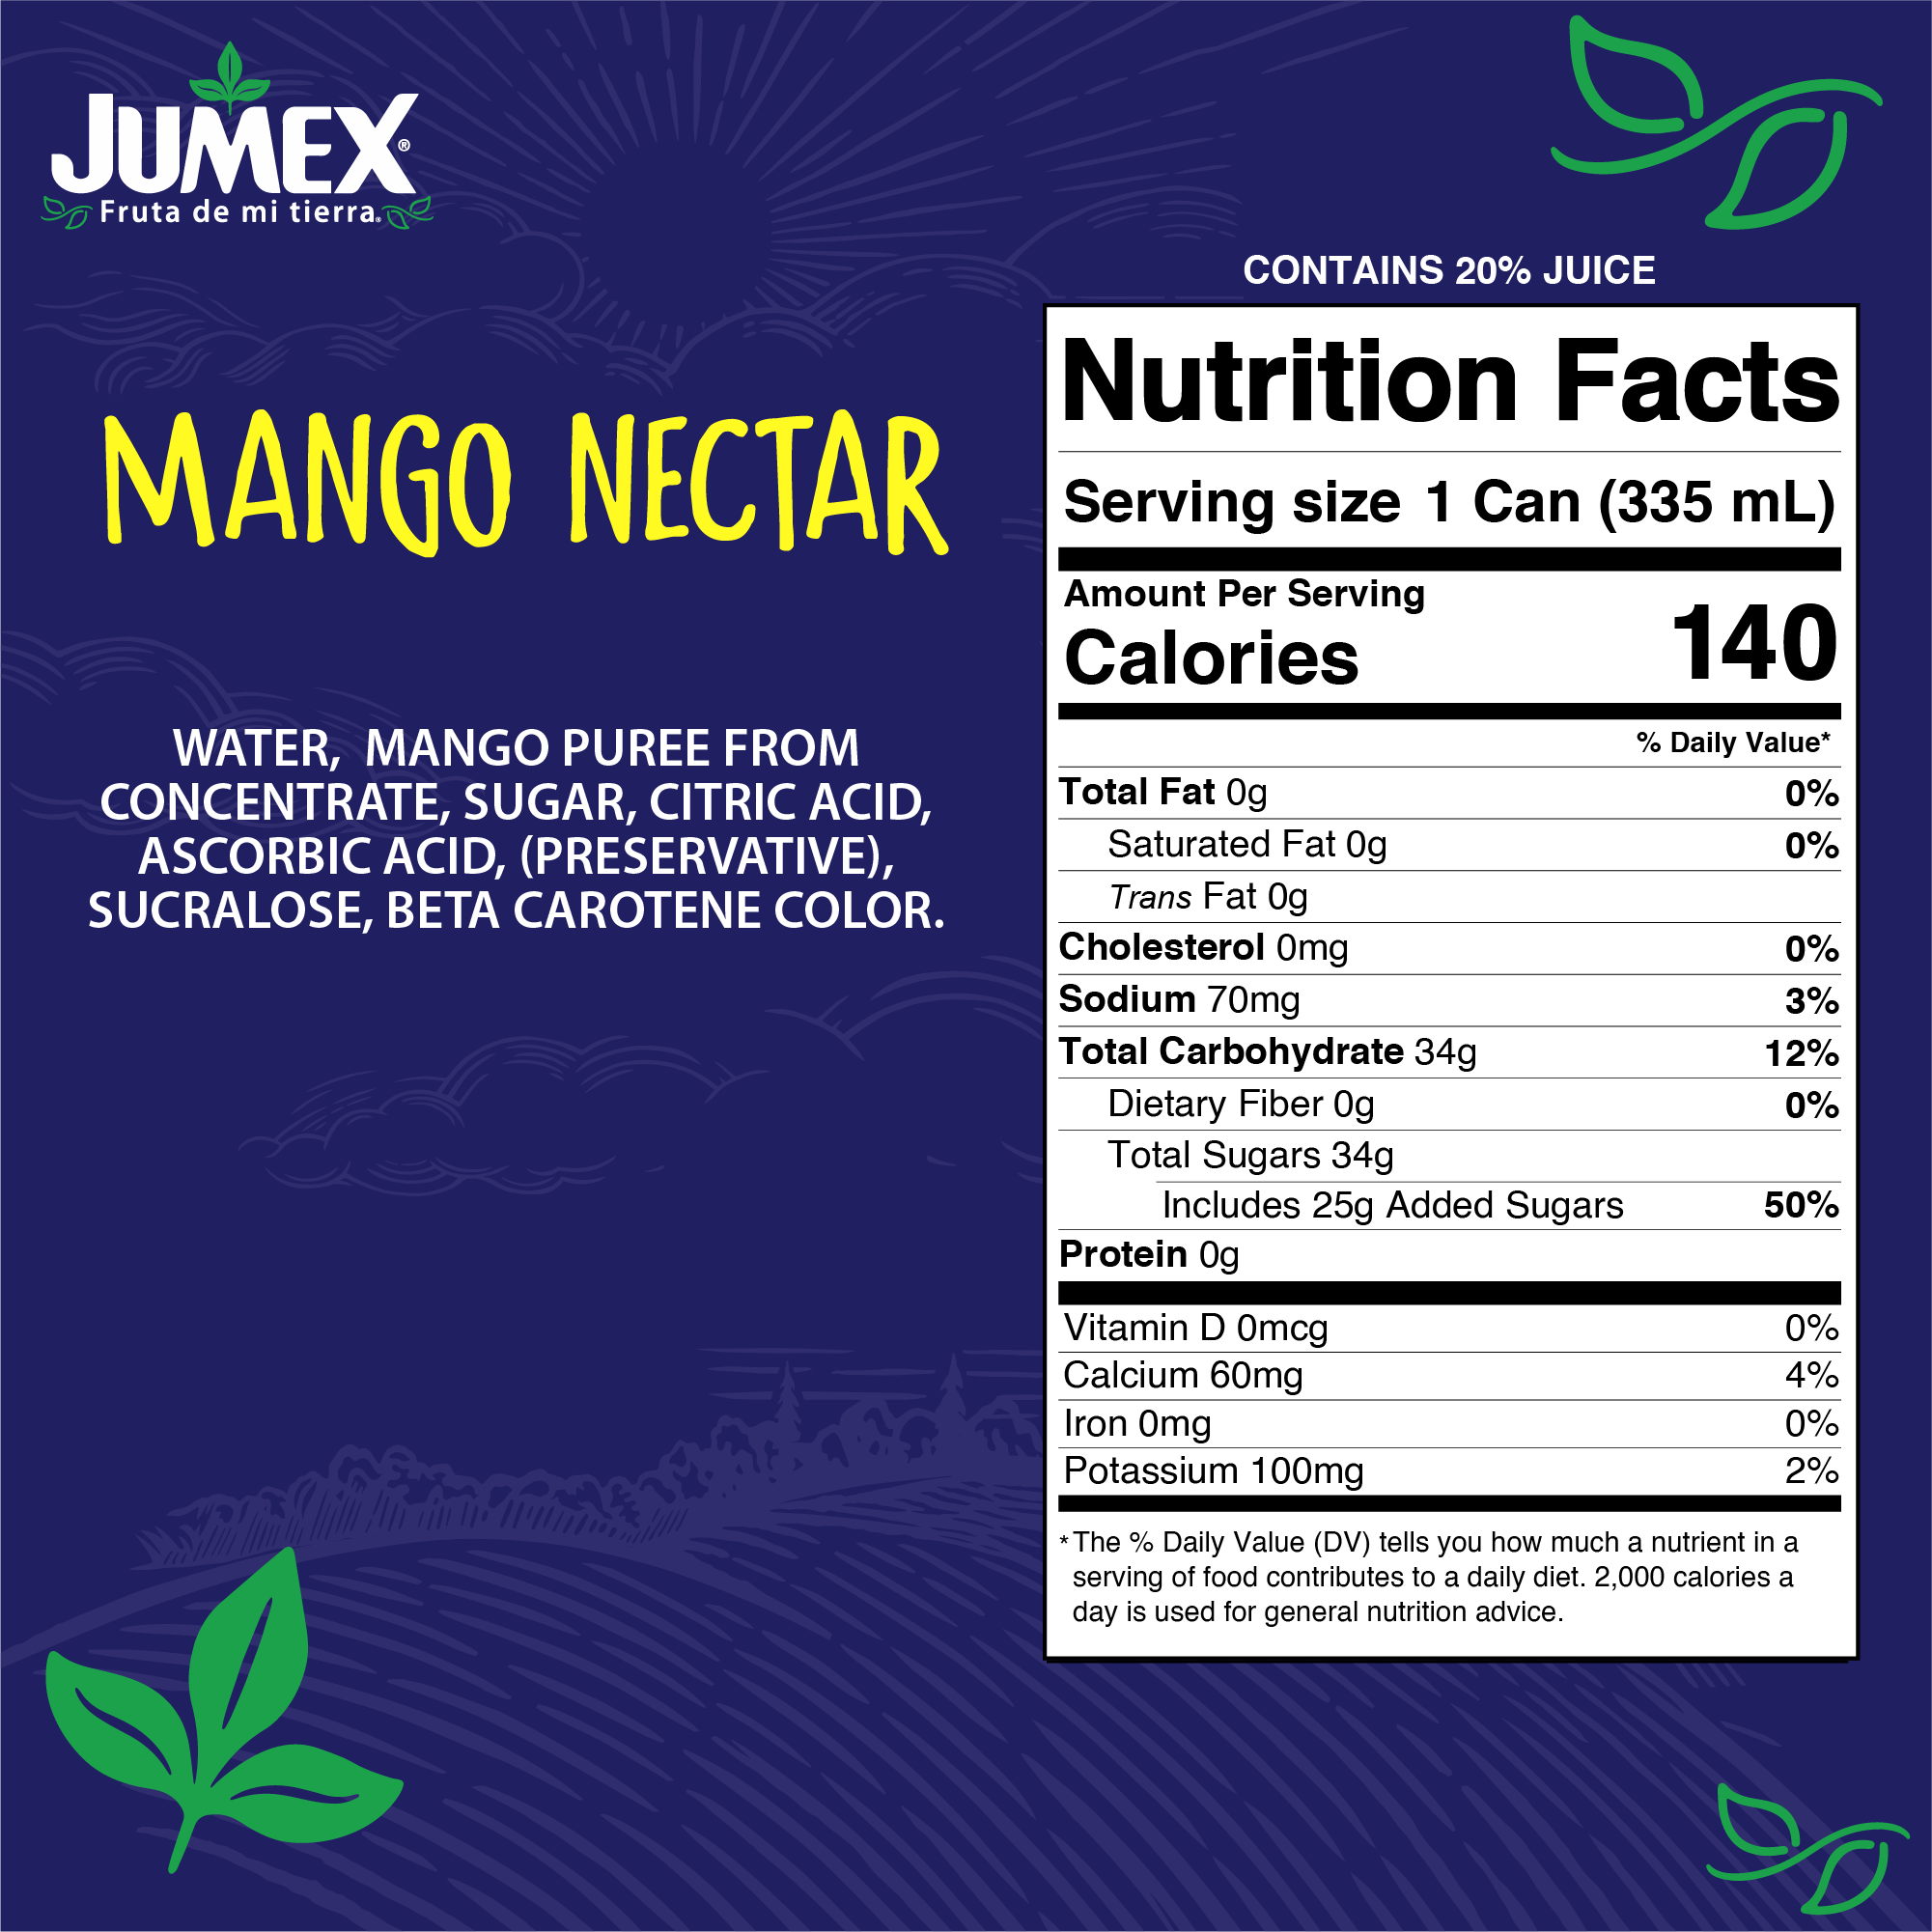 Jumex Mango Nectar from Concentrate, 11.3 Fl. oz. - image 3 of 6